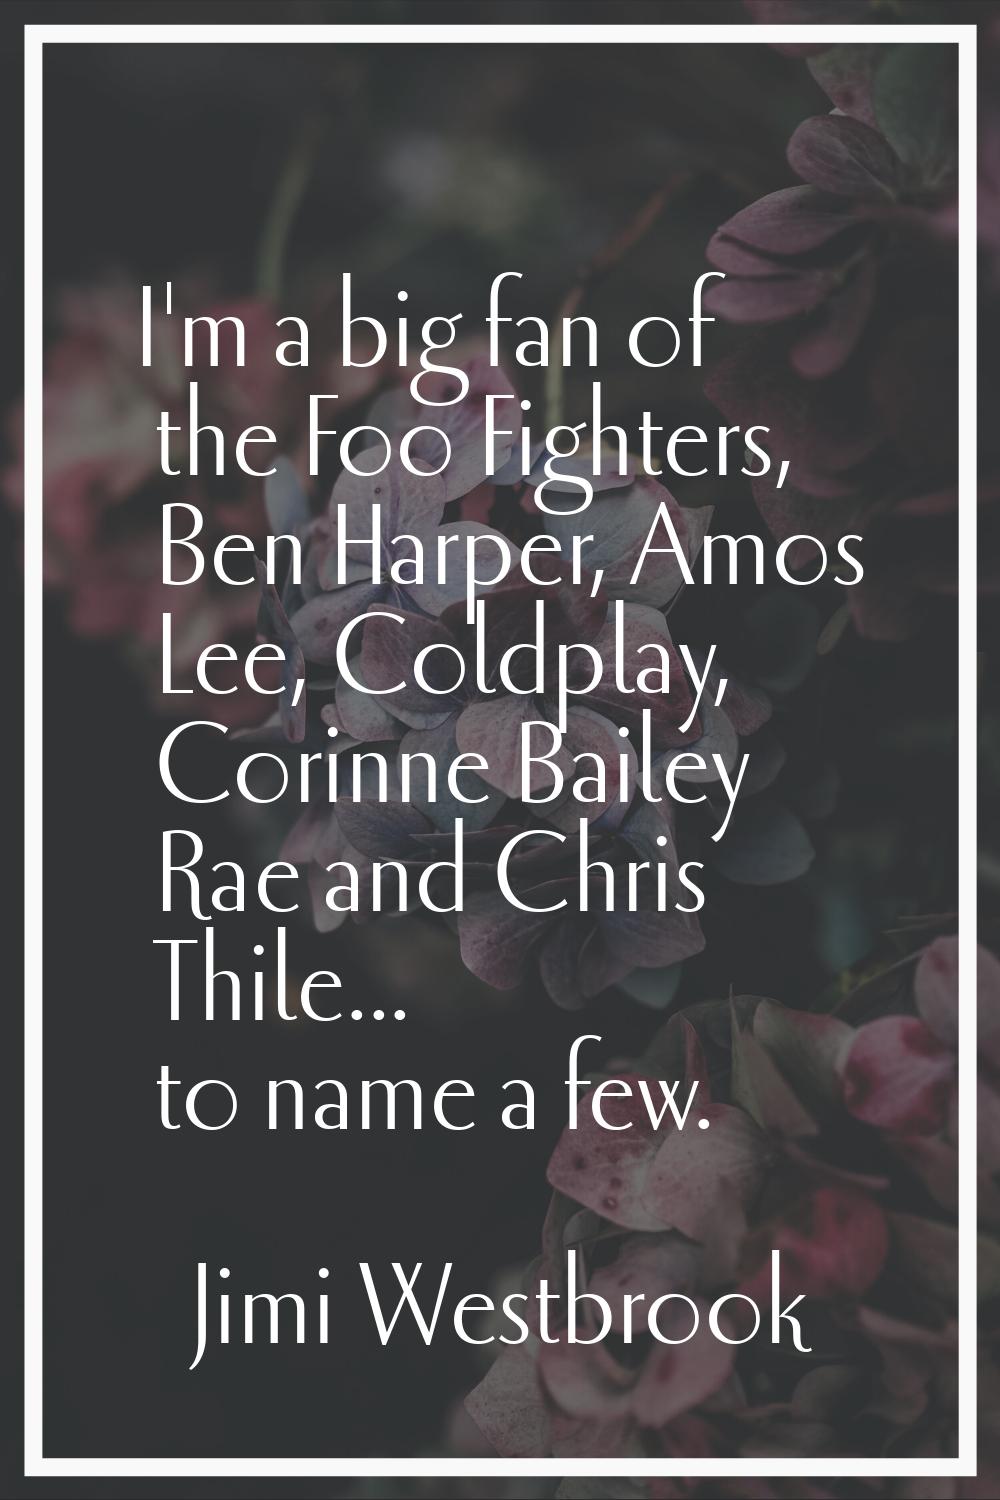 I'm a big fan of the Foo Fighters, Ben Harper, Amos Lee, Coldplay, Corinne Bailey Rae and Chris Thi